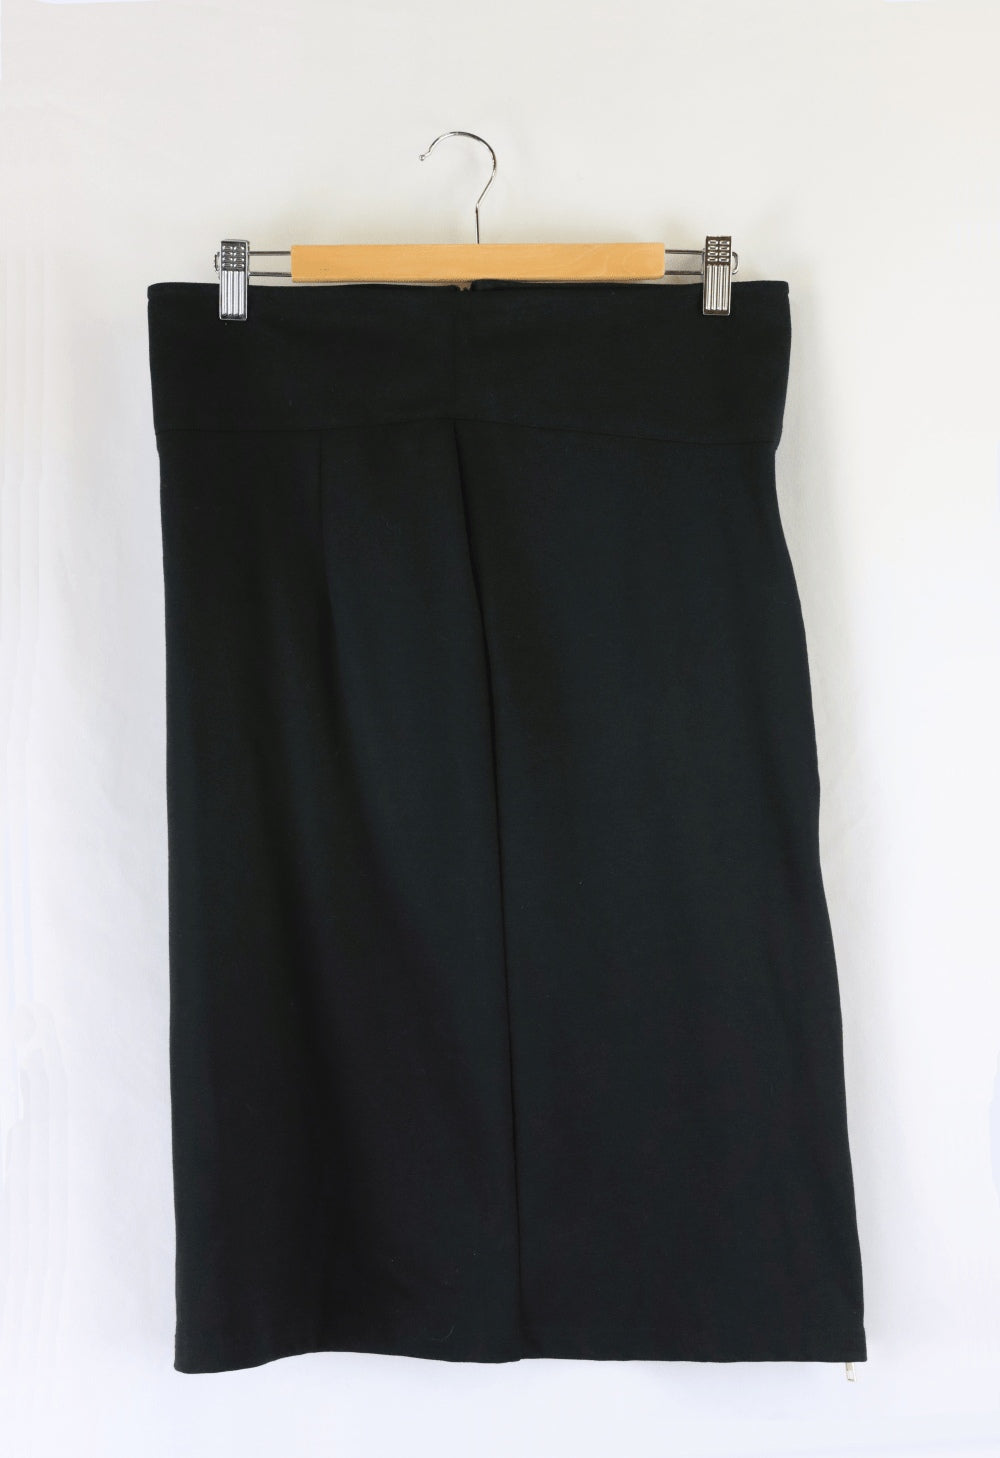 LS Collection Black Skirt S